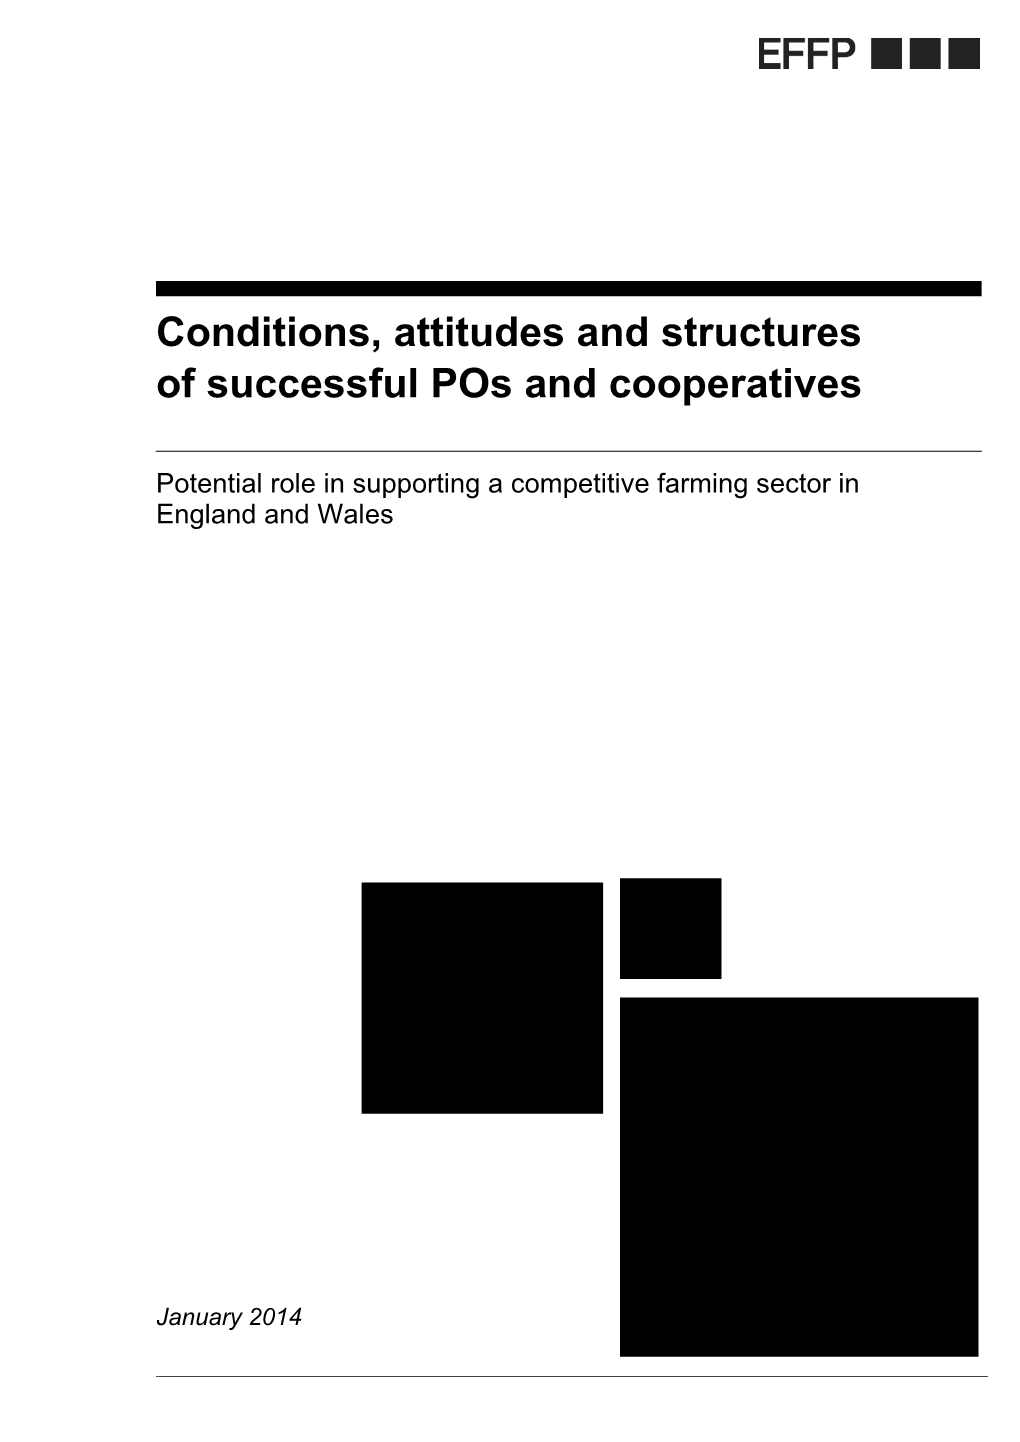 Conditions, Attitudes and Structures of Successful Pos and Cooperatives